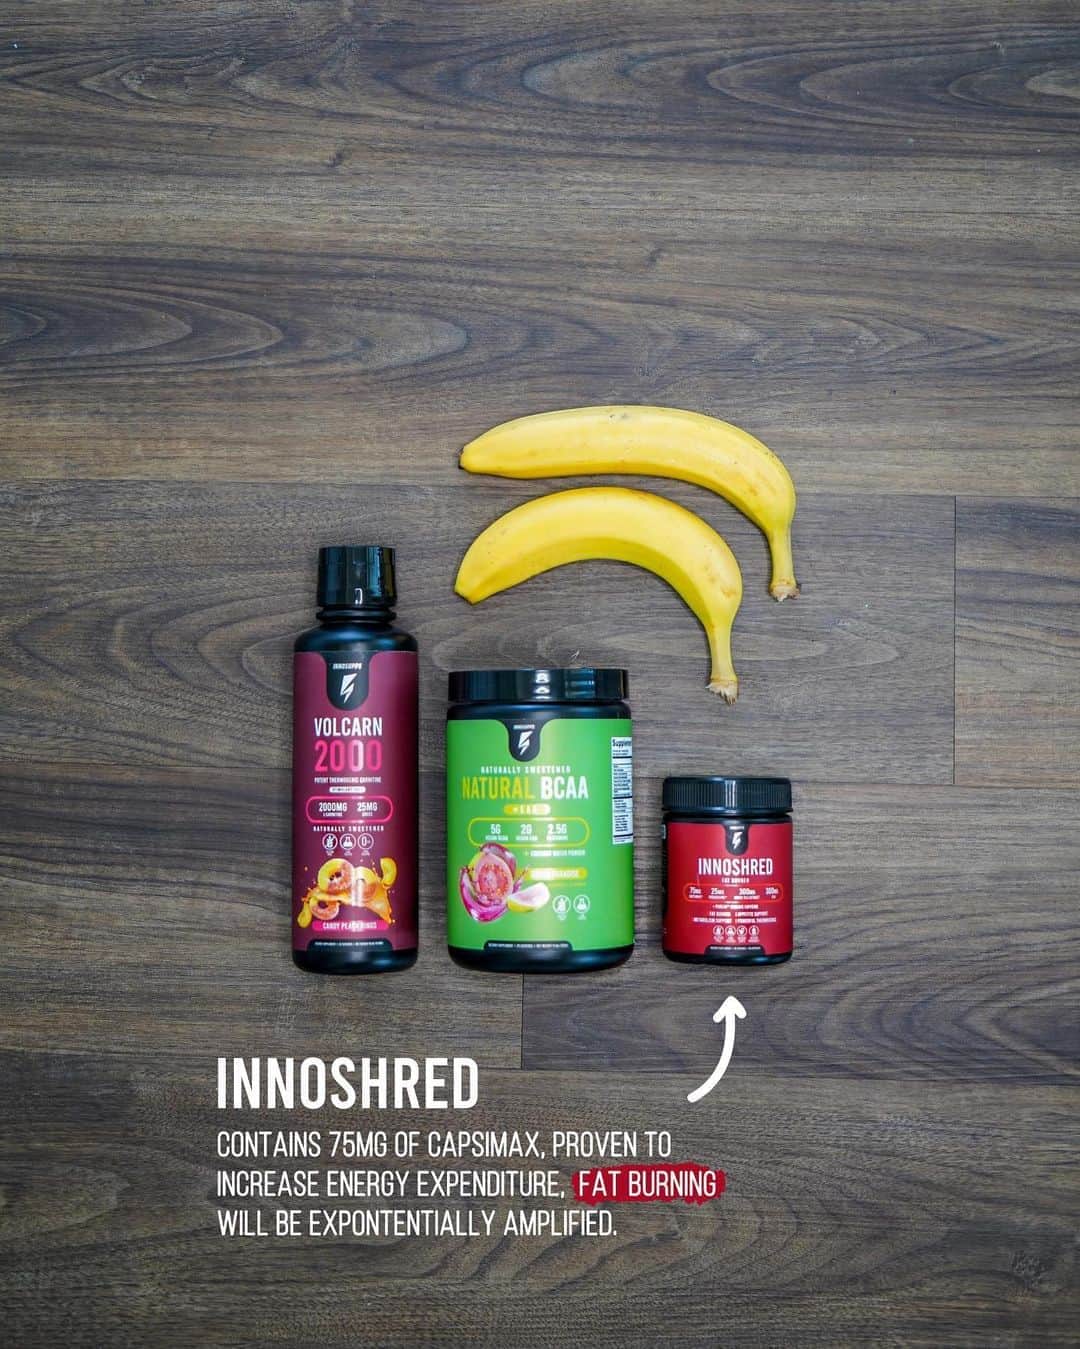 Simeon Pandaさんのインスタグラム写真 - (Simeon PandaInstagram)「A long bike ride is overdue! So here’s a quick recap on my @innosupps stack I use before & during my bike rides 🚲💨⁣ Any one else planning on getting a ride in this weekend? ⁣⁣ ⁣⁣⁣⁣ 🌱 Natural BCAA⁣⁣⁣⁣ ⁣⁣⁣⁣ I add Natural BCAA to my water bottle and take swigs during my rides. The combination of BCAA, EAA, and Glutamine gives you the muscle building amino acids to pull from instead of breaking down your hard earned muscle tissue. ⁣⁣⁣⁣ ⁣⁣ 🌋 Volcarn 2000⁣⁣⁣⁣ ⁣⁣⁣⁣ Best thermogenic carnitine you can get! Volcarn you can actually feel working as the sweat drips down your face 😅⁣⁣⁣⁣ ⁣⁣⁣⁣ 🔥 Innoshred ⁣⁣⁣⁣ ⁣⁣⁣⁣ Brings the heat and has ingredients proven to amplify the fat burning process exponentially. ⁣⁣⁣⁣ ⁣⁣⁣⁣ 🍌 Bananas⁣⁣ ⁣⁣⁣⁣ Gotta have at least 2 of these, 1 before and 1 during (my bike rides are 1.5 - 2hrs on average) I need ensure my potassium is stocked up so my muscles don’t cramp up. ⁣⁣ ⁣⁣ 🐶 @mrcodybear⁣⁣⁣⁣ ⁣⁣⁣⁣ I take @mrcodybear on my bike rides for two reasons:⁣⁣⁣⁣ ⁣⁣⁣⁣ 1. He weighs between 20-25lbs, so I figure the extra weight makes me work 🤏 much harder 😅⁣⁣⁣⁣ 2. He loves it! Jumps at me every time I grab the backpack 🎒 ⁣⁣⁣⁣ ⁣⁣⁣⁣ To build your stack or for more info, visit:⁣⁣⁣⁣ INNOSUPPS.COM  @innosupps ⁣⁣⁣⁣ 👉 Link in bio 🌍 Worldwide Shipping」8月14日 11時32分 - simeonpanda